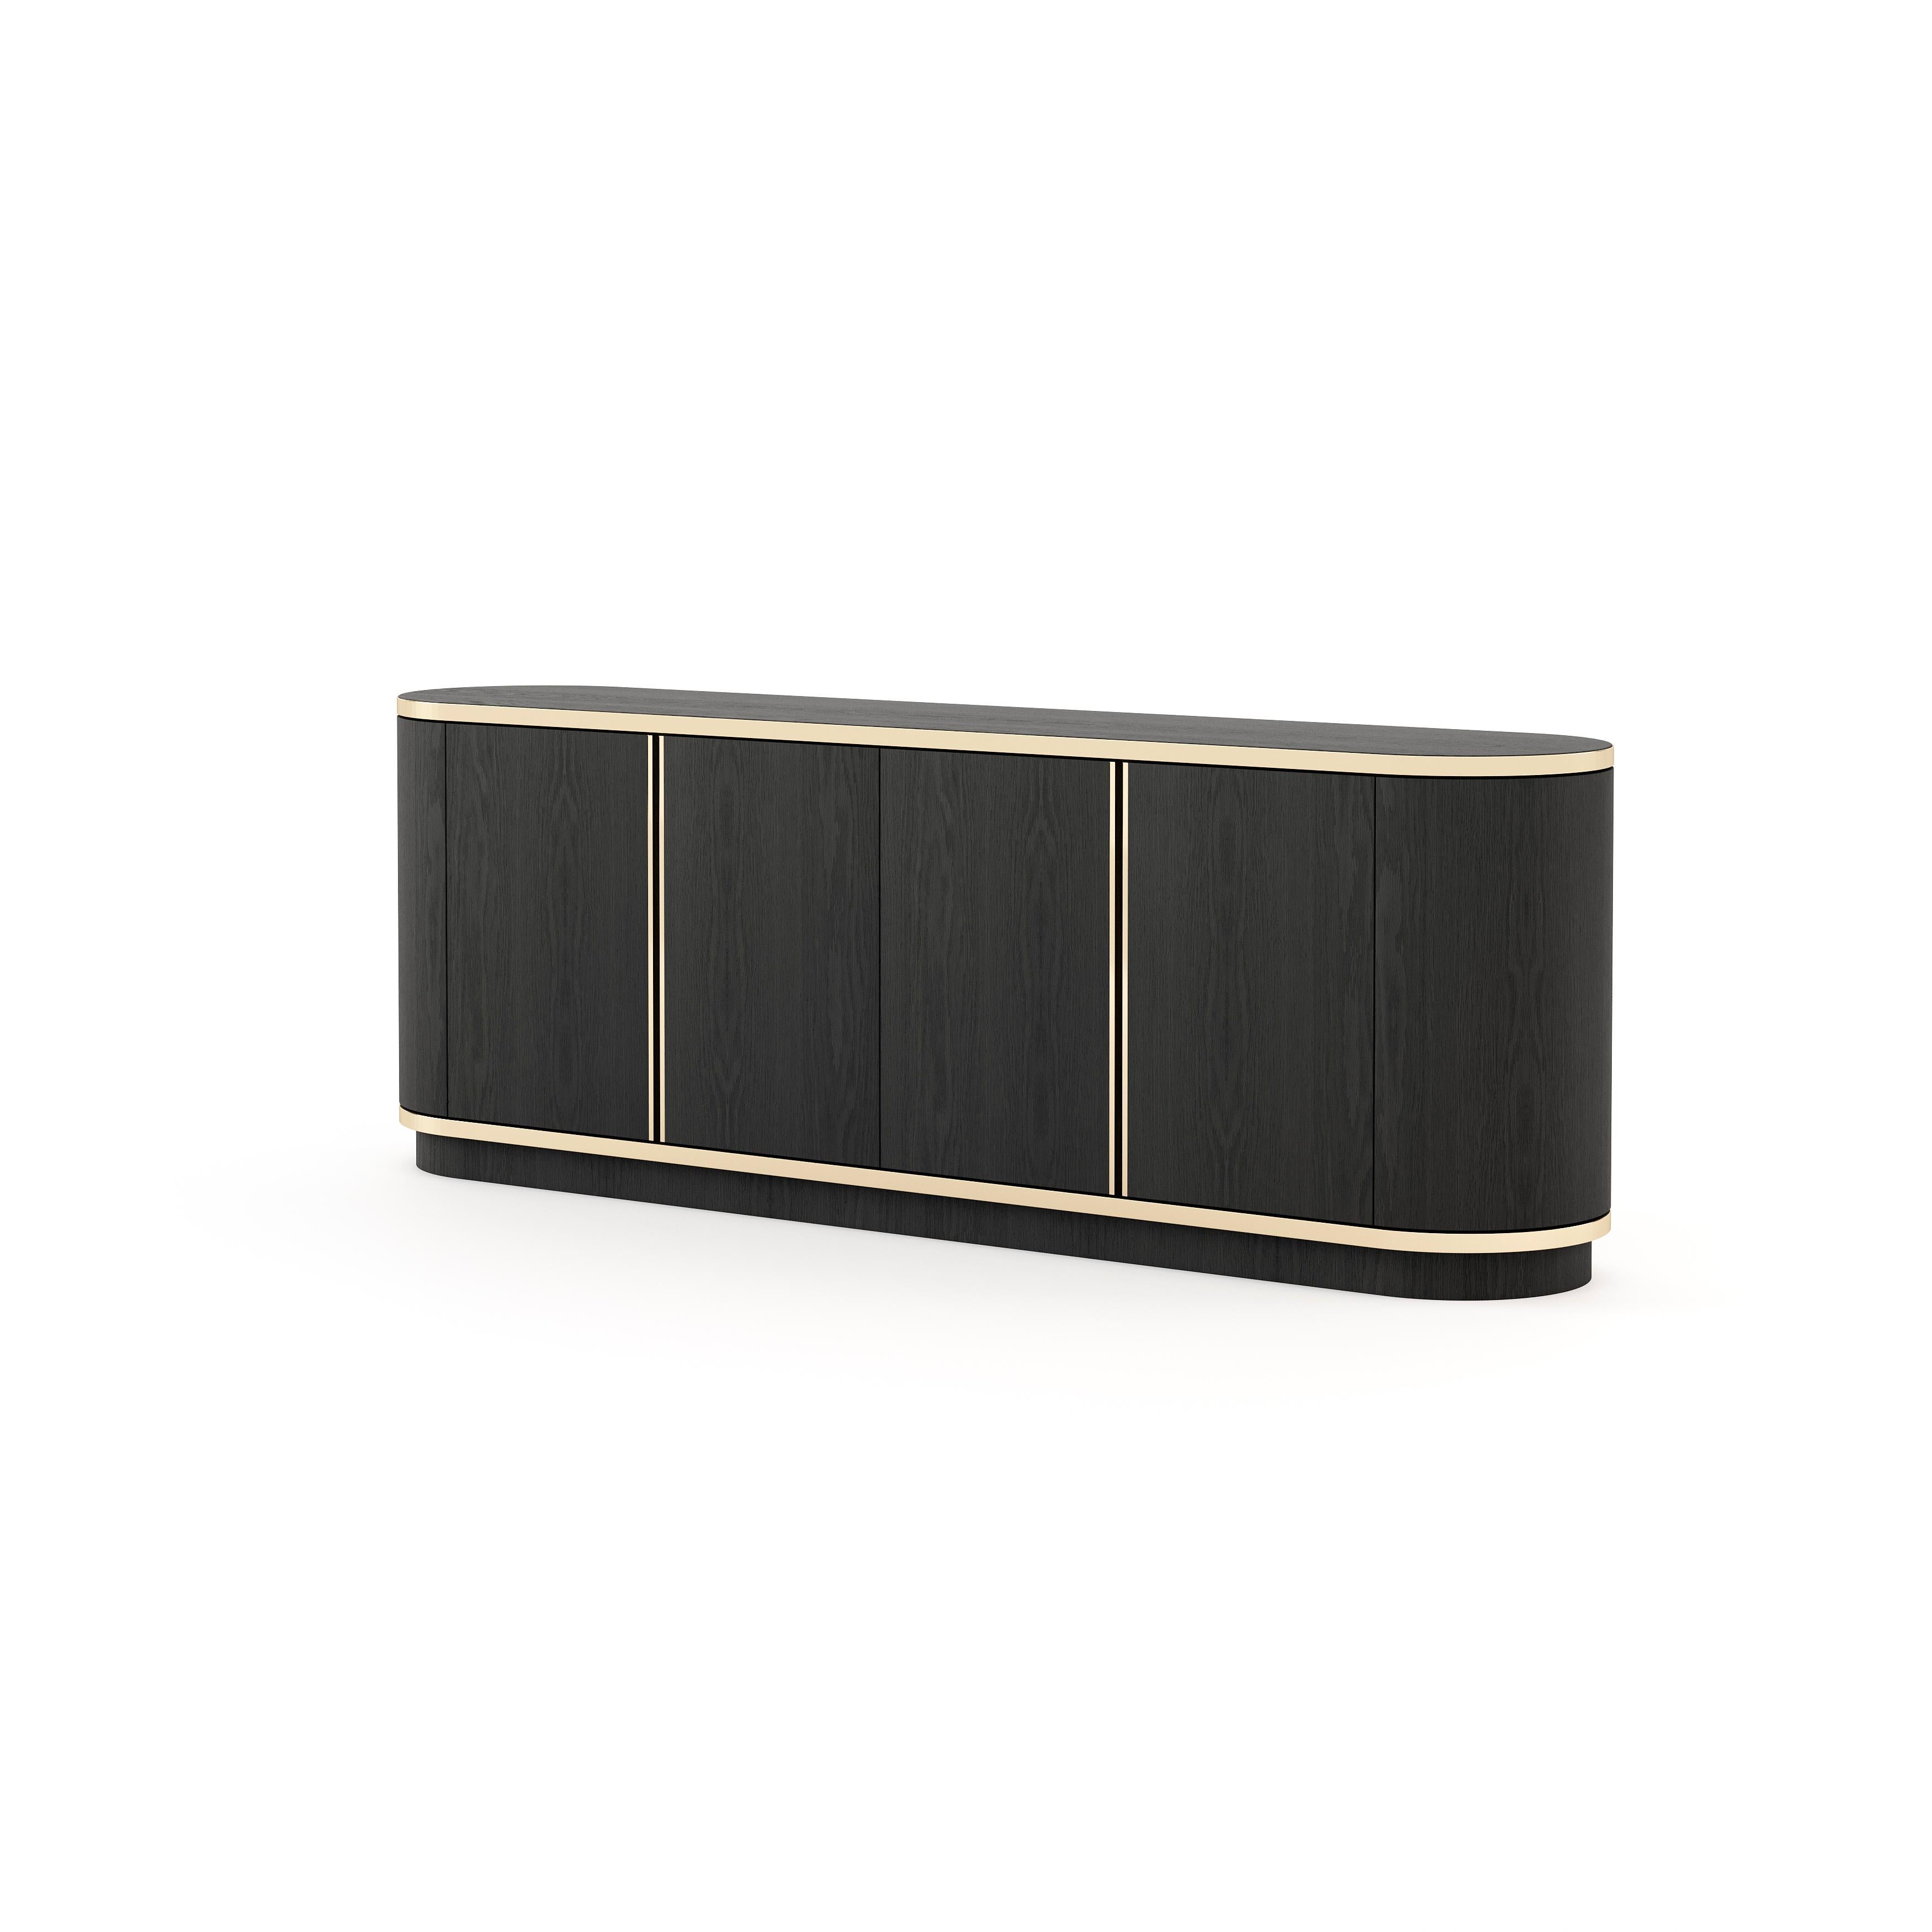 Brown sideboard has an elegant yet refined language, featuring a wood surface and trimmed metallic details. The curved design body creates a modern mid-century piece for any residential or hospitality space. A unique character piece for outstanding